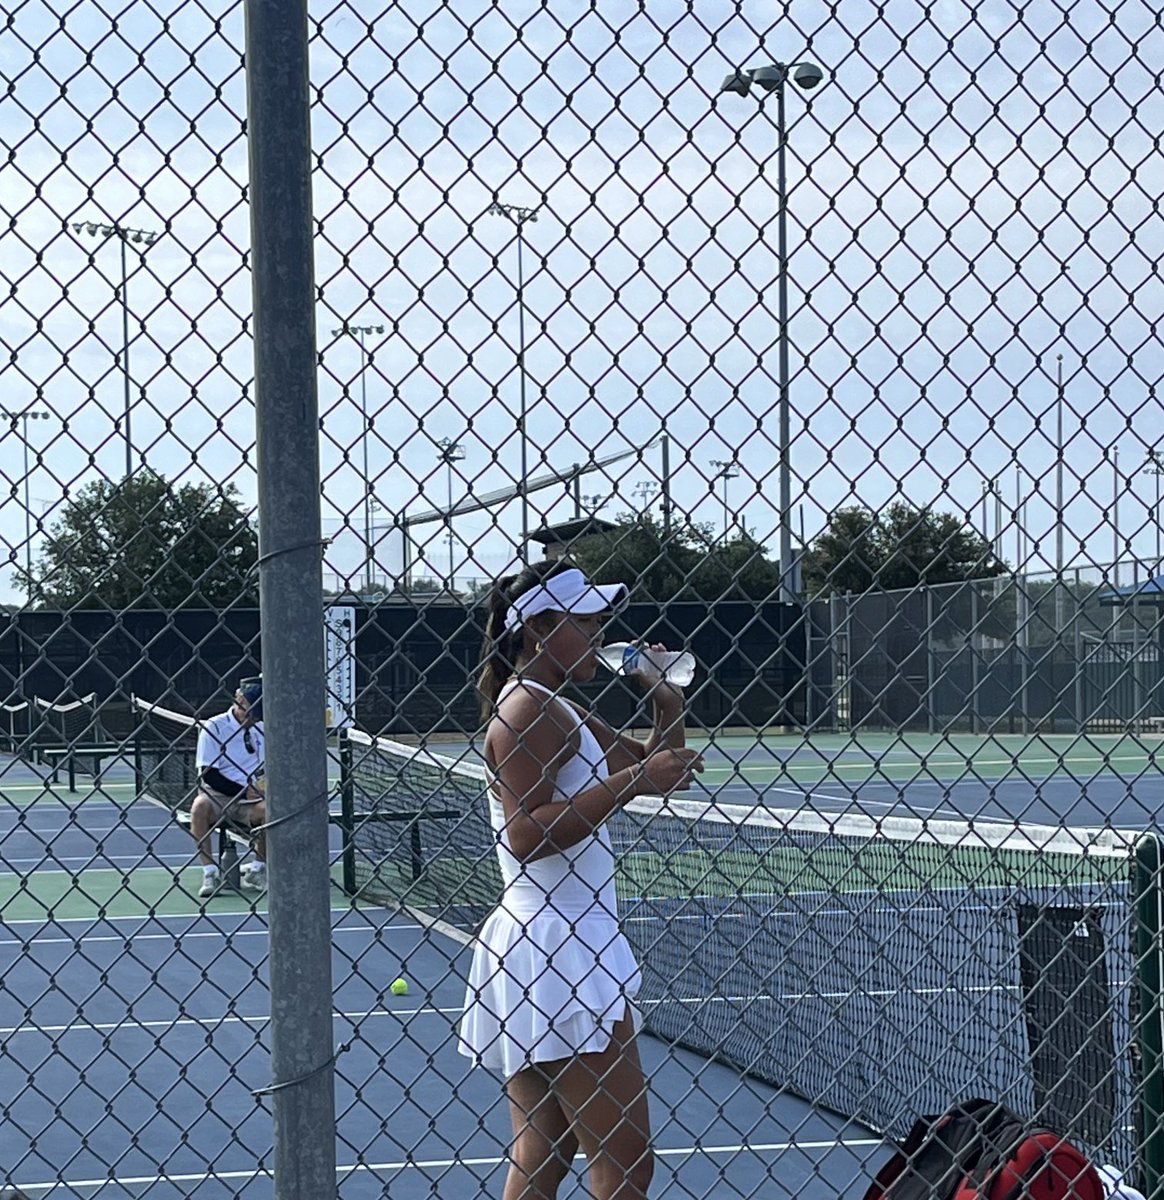 Michelle Li won the first set, 6-1, and leads 1-0, in the 2nd set. Keep it going, Michelle!